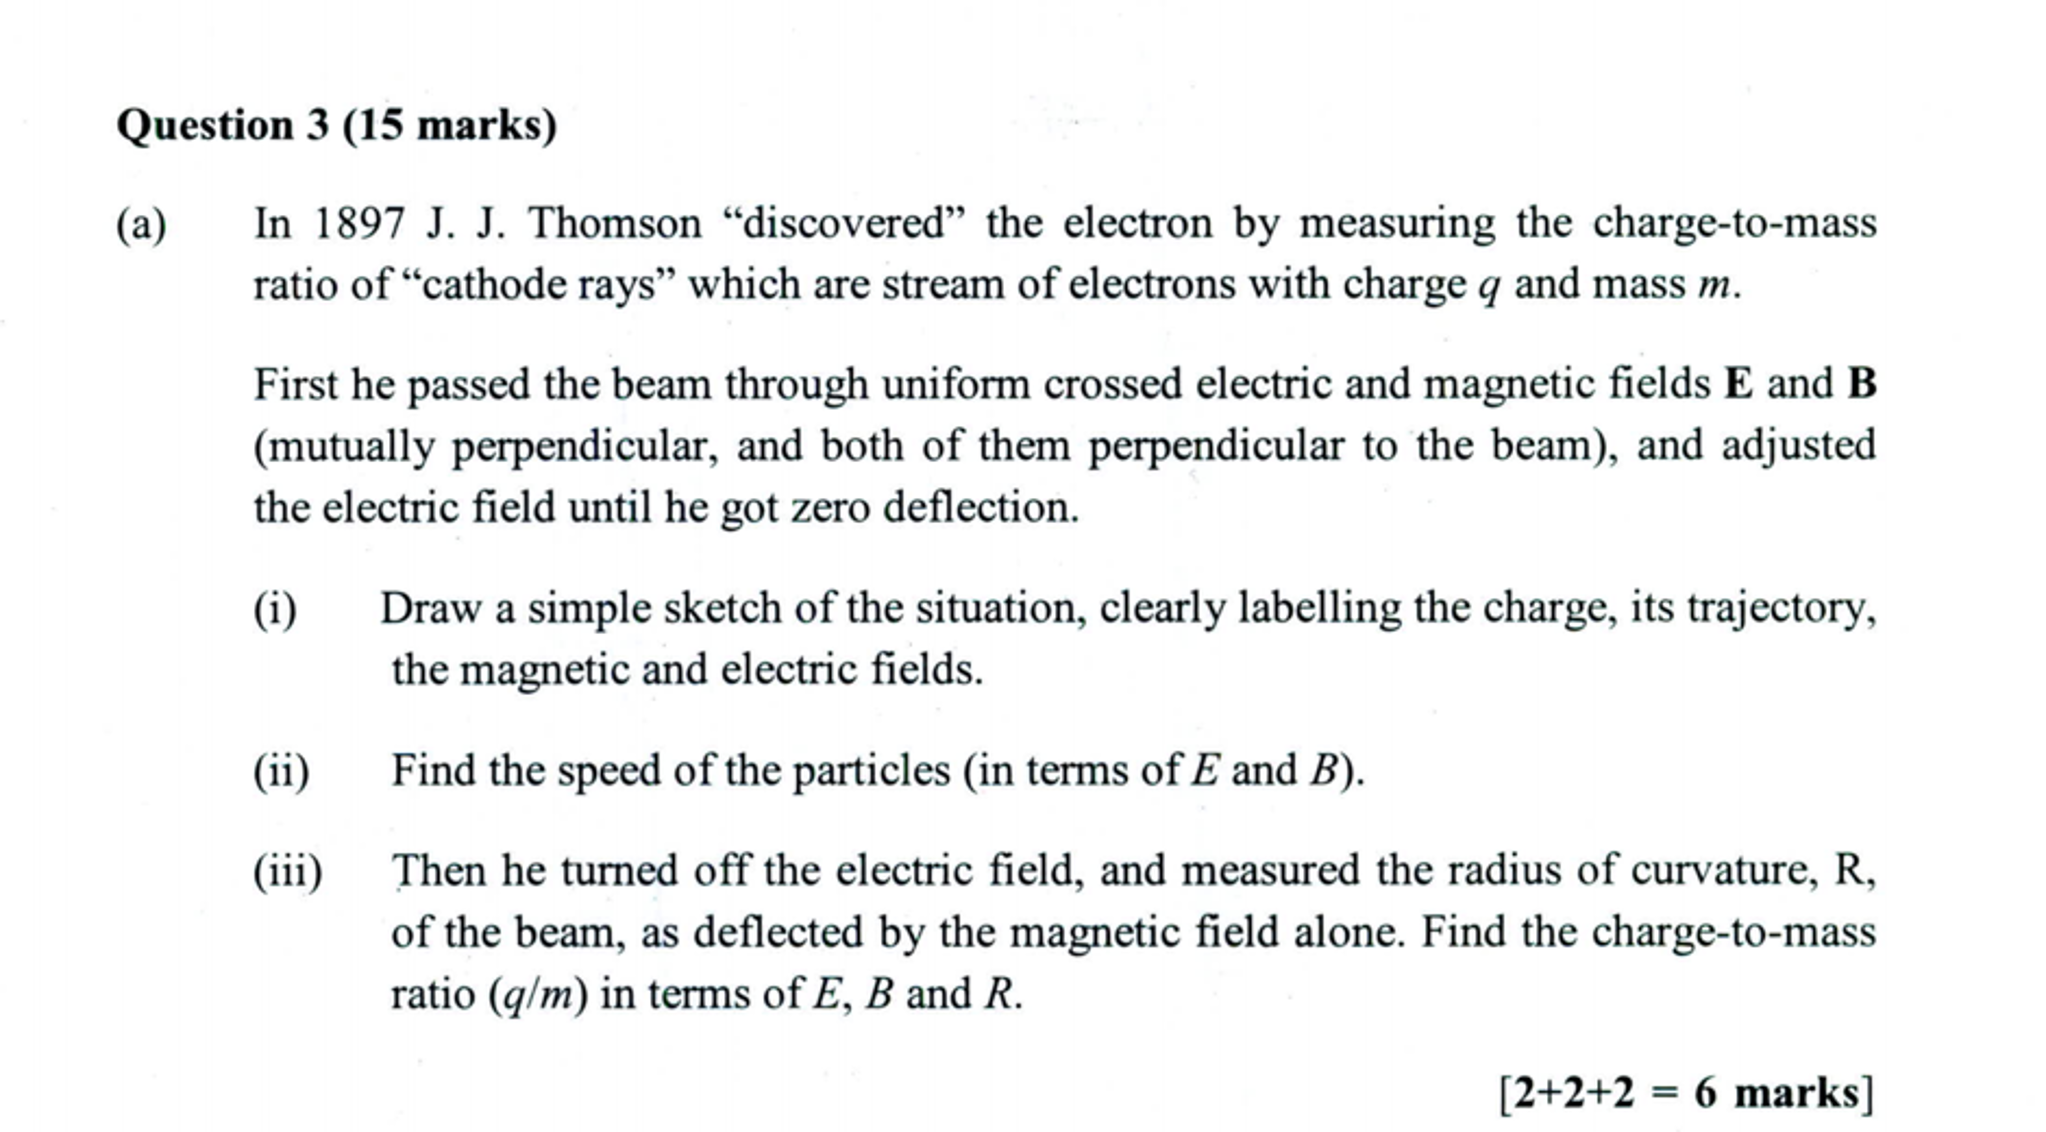 when did jj thomson discovered the electron